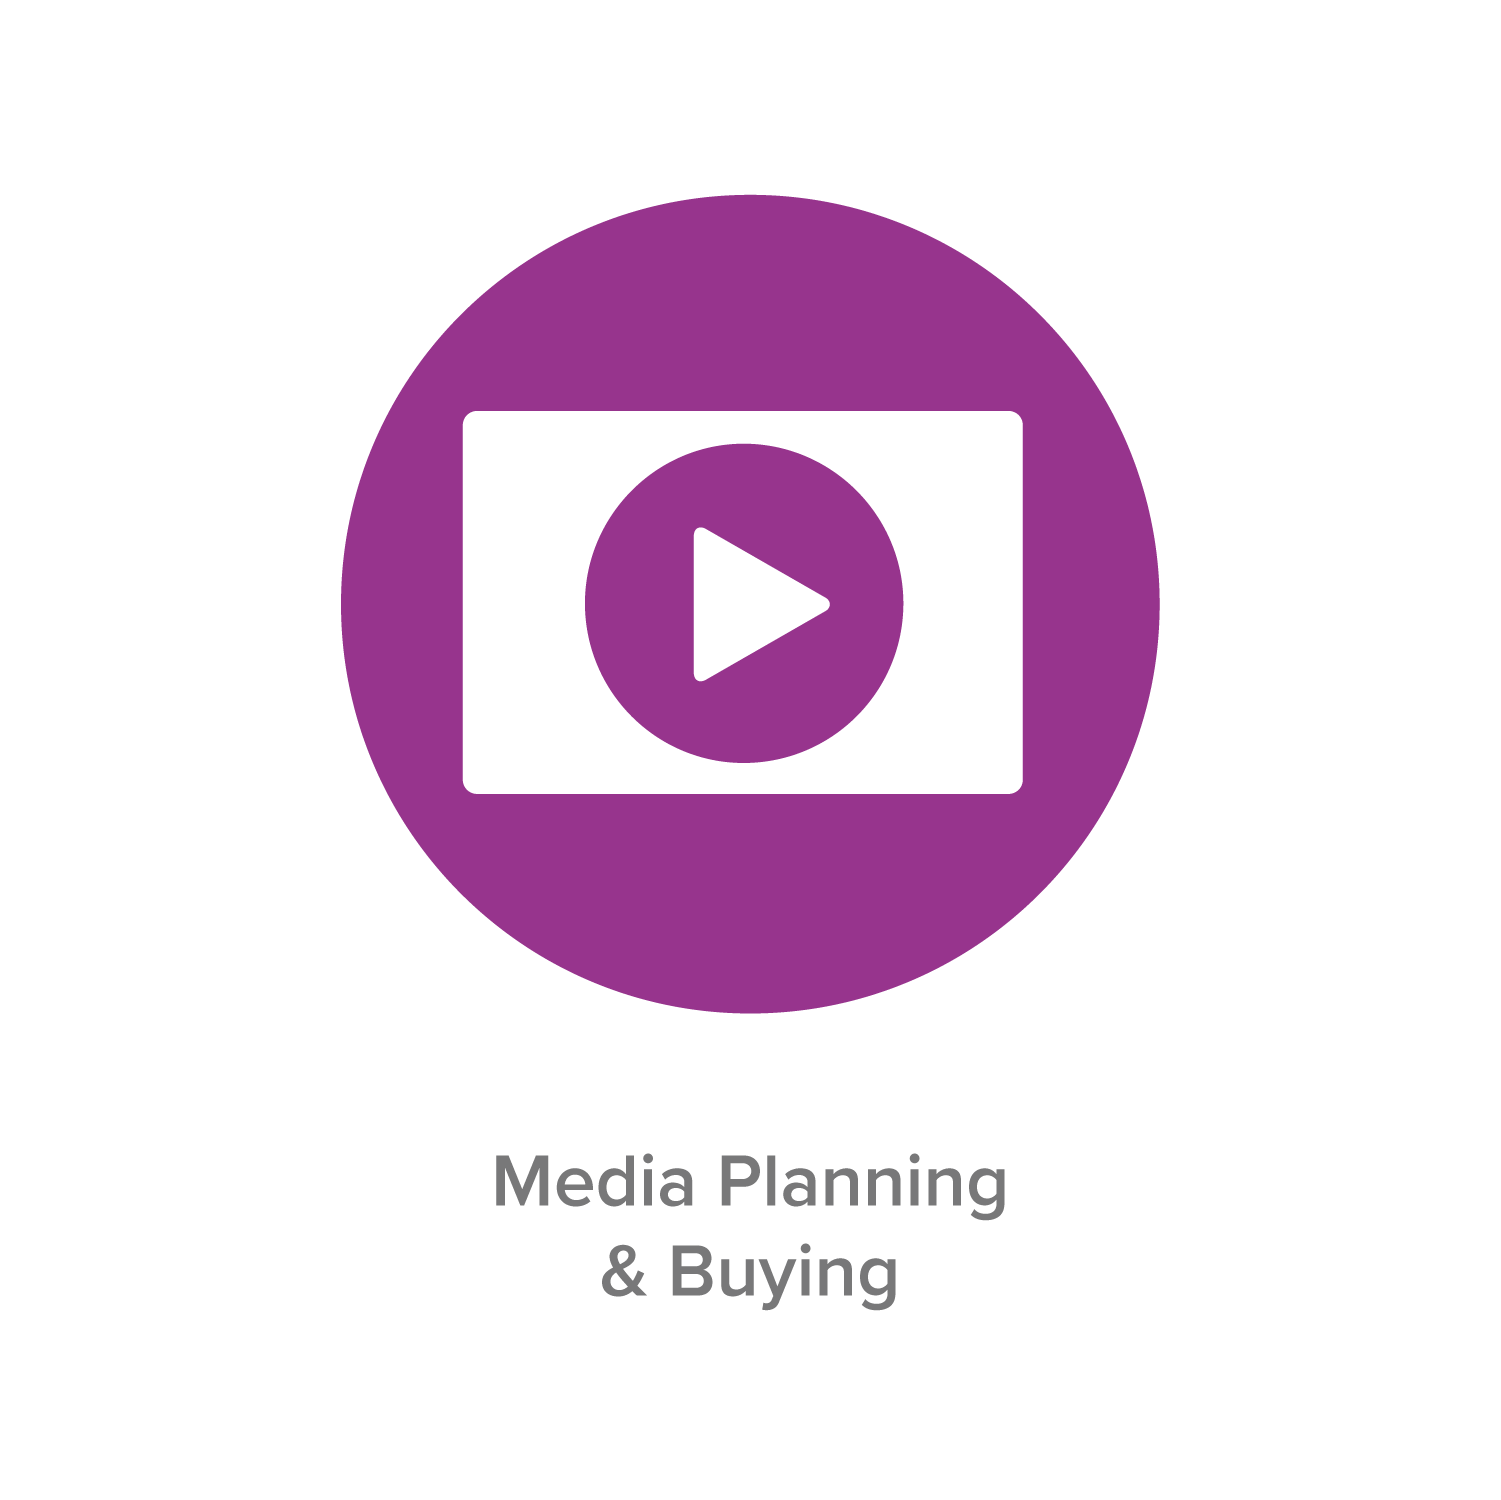 Media Planning and Buying graphic